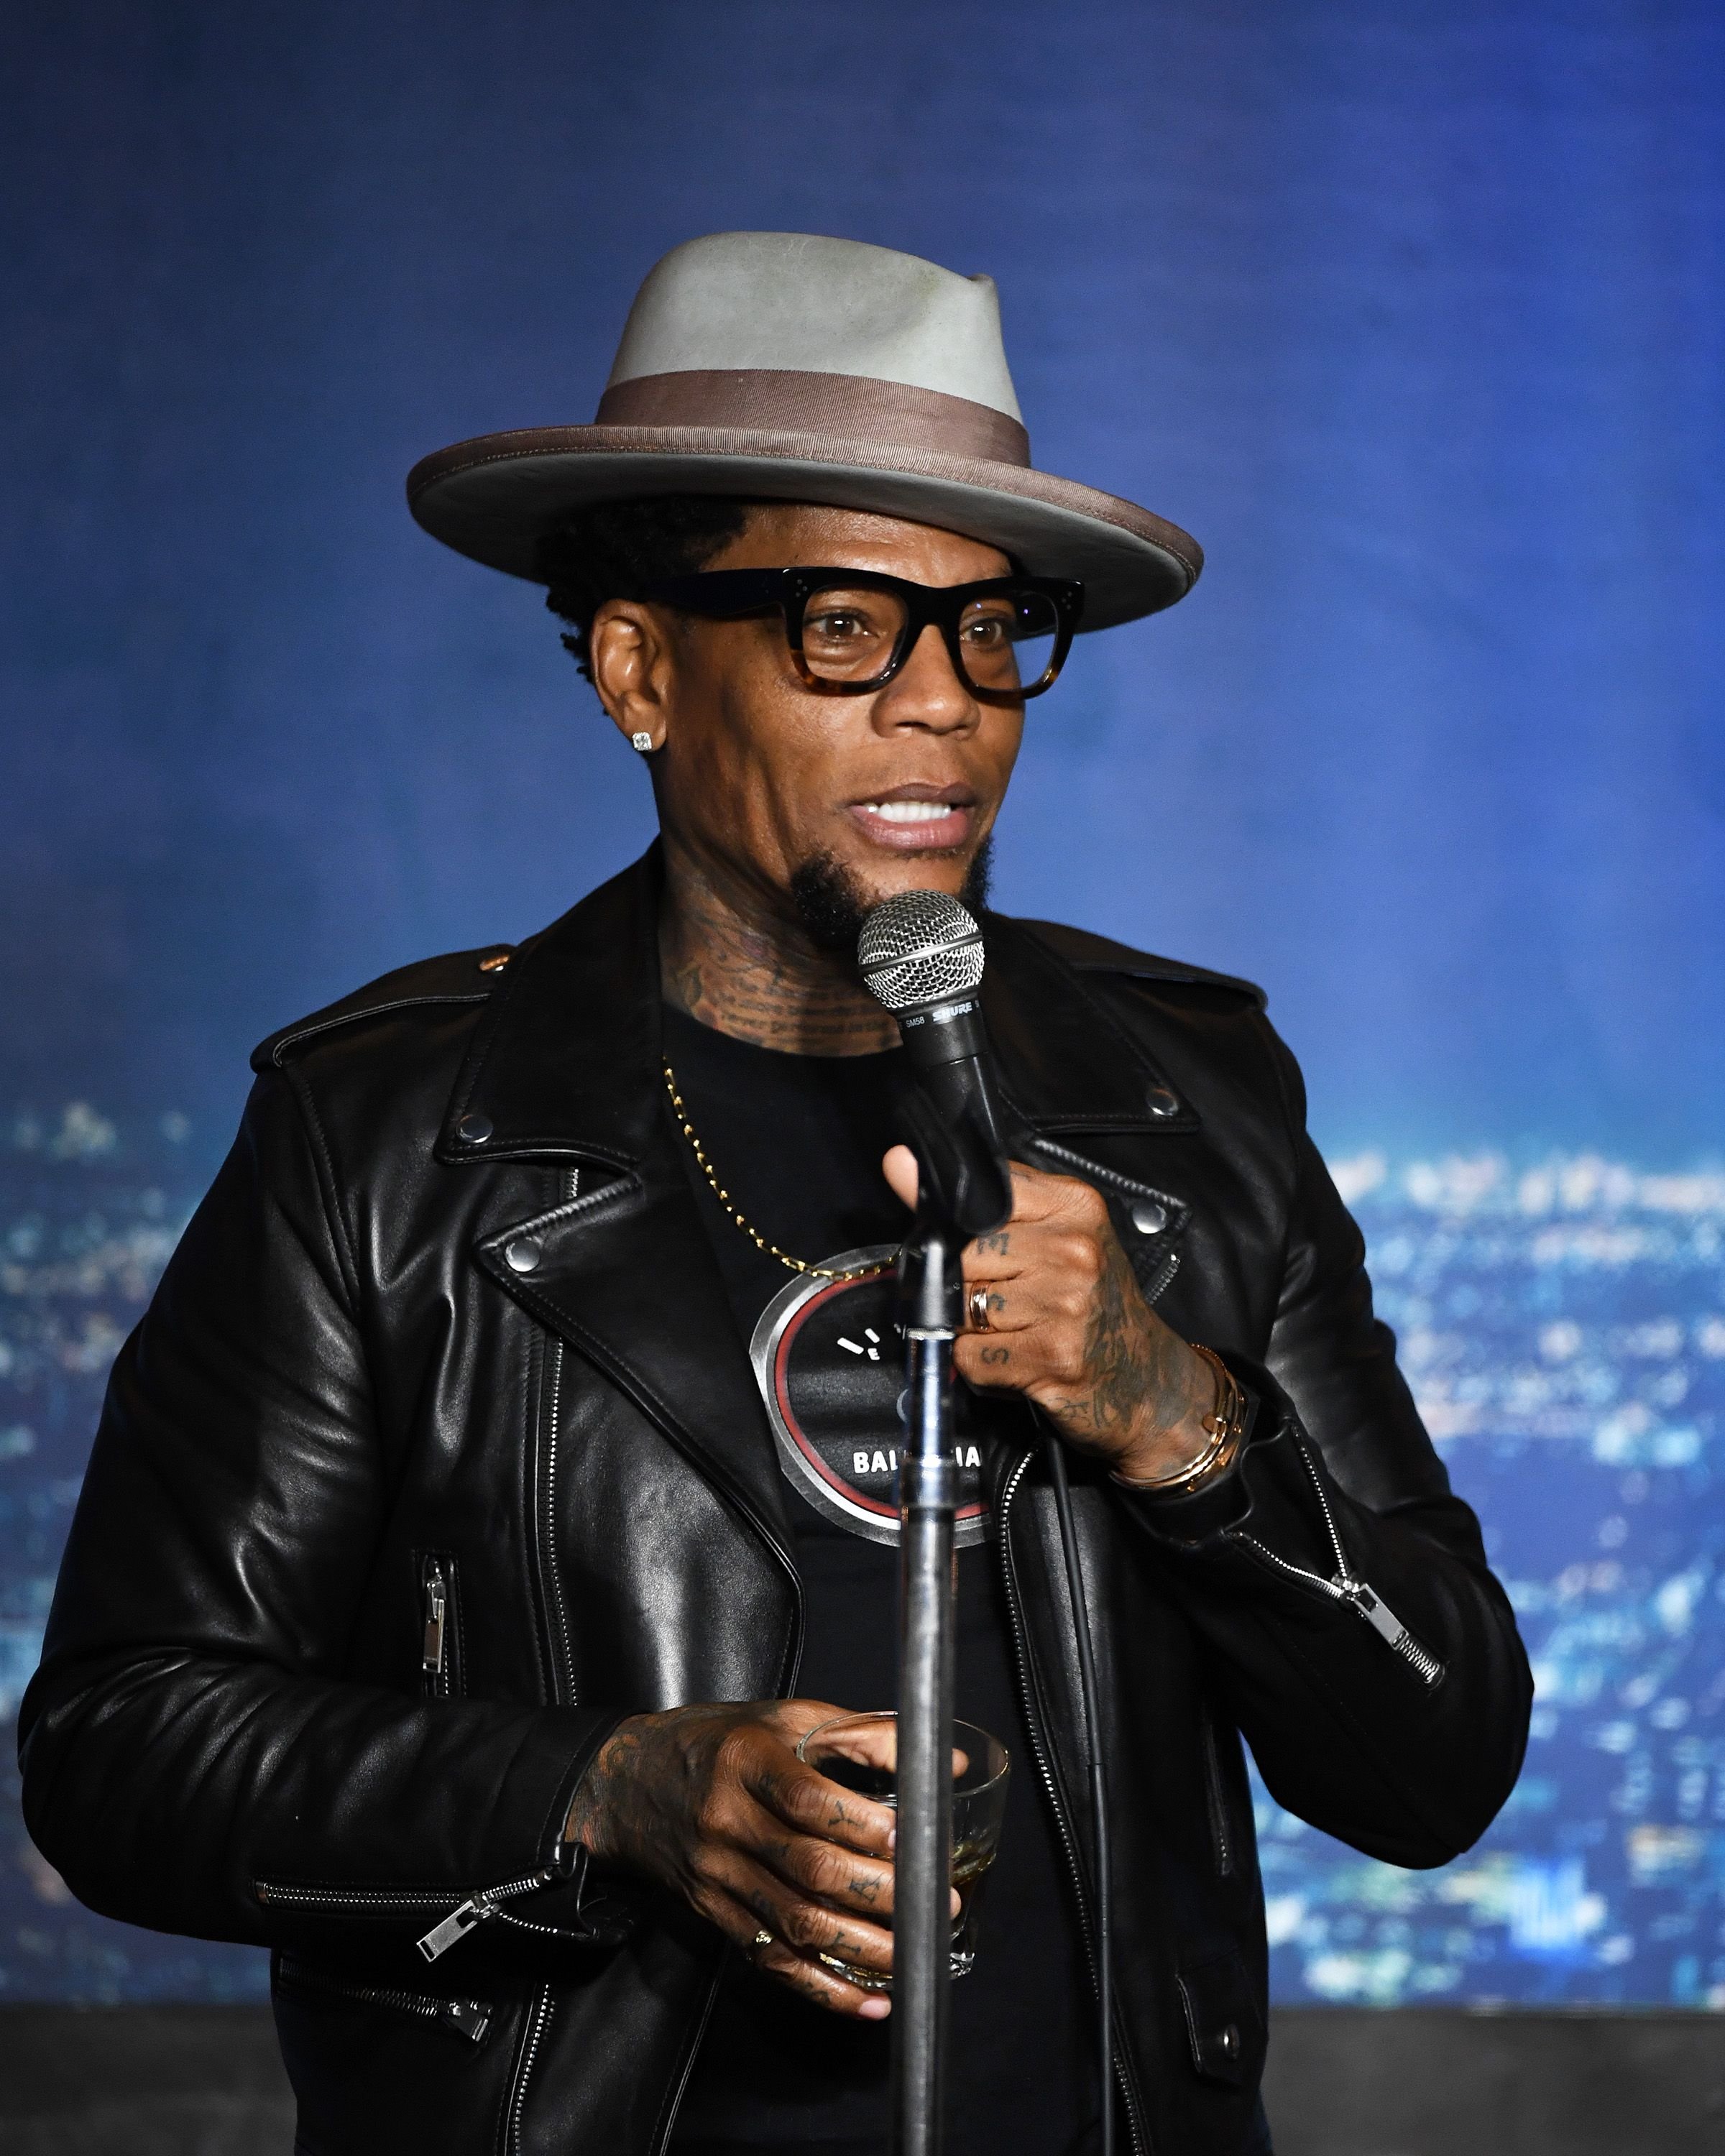 D.L. Hughley during his performance at The Ice House Comedy Club on February 29, 2020 in Pasadena, California. | Source: Getty Images